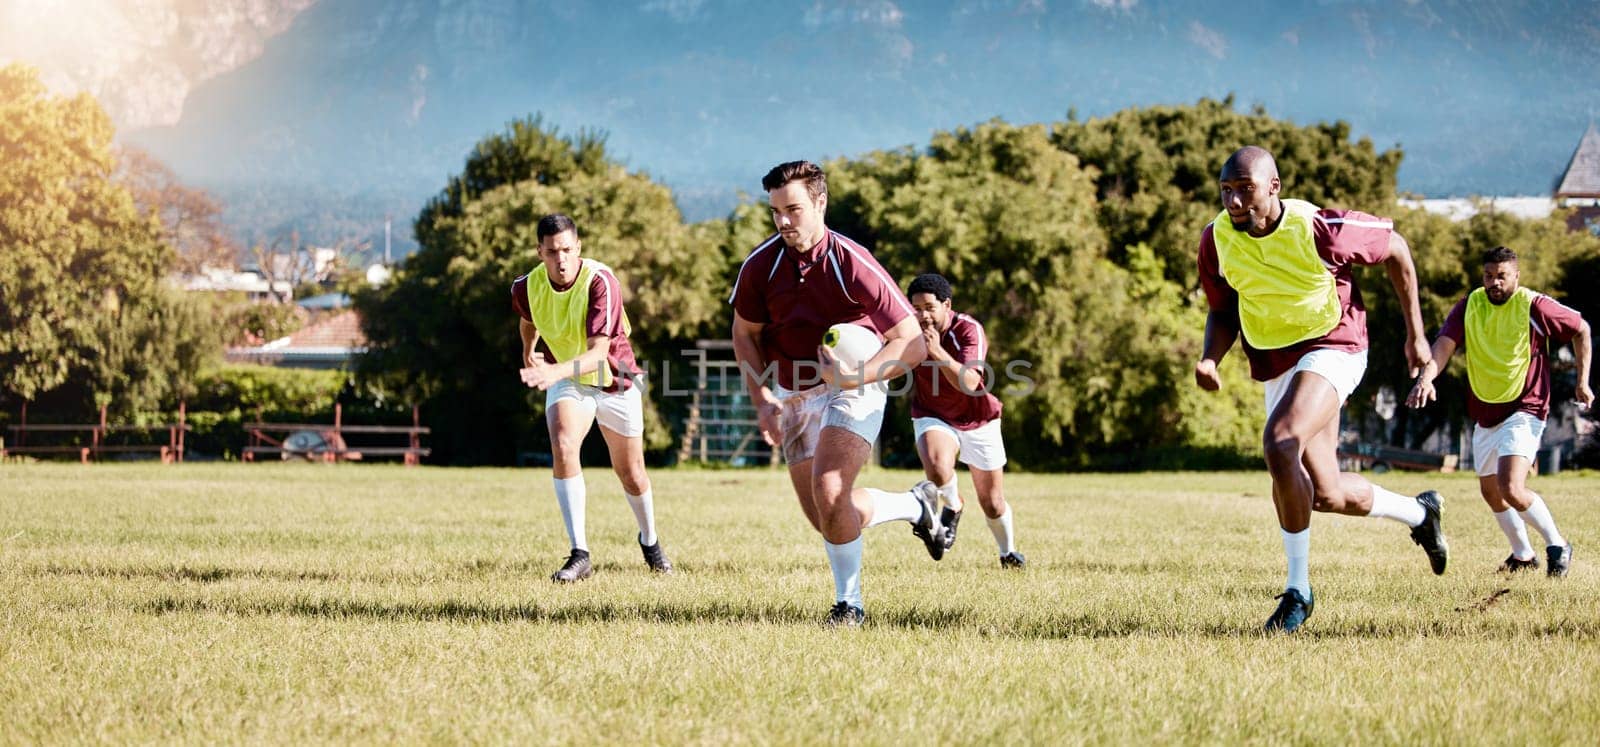 Game, sports and men playing rugby in a competition, match and running with a ball on a field. Fitness, exercise and players training for a team sport, cardio and collaboration in a park for practice.